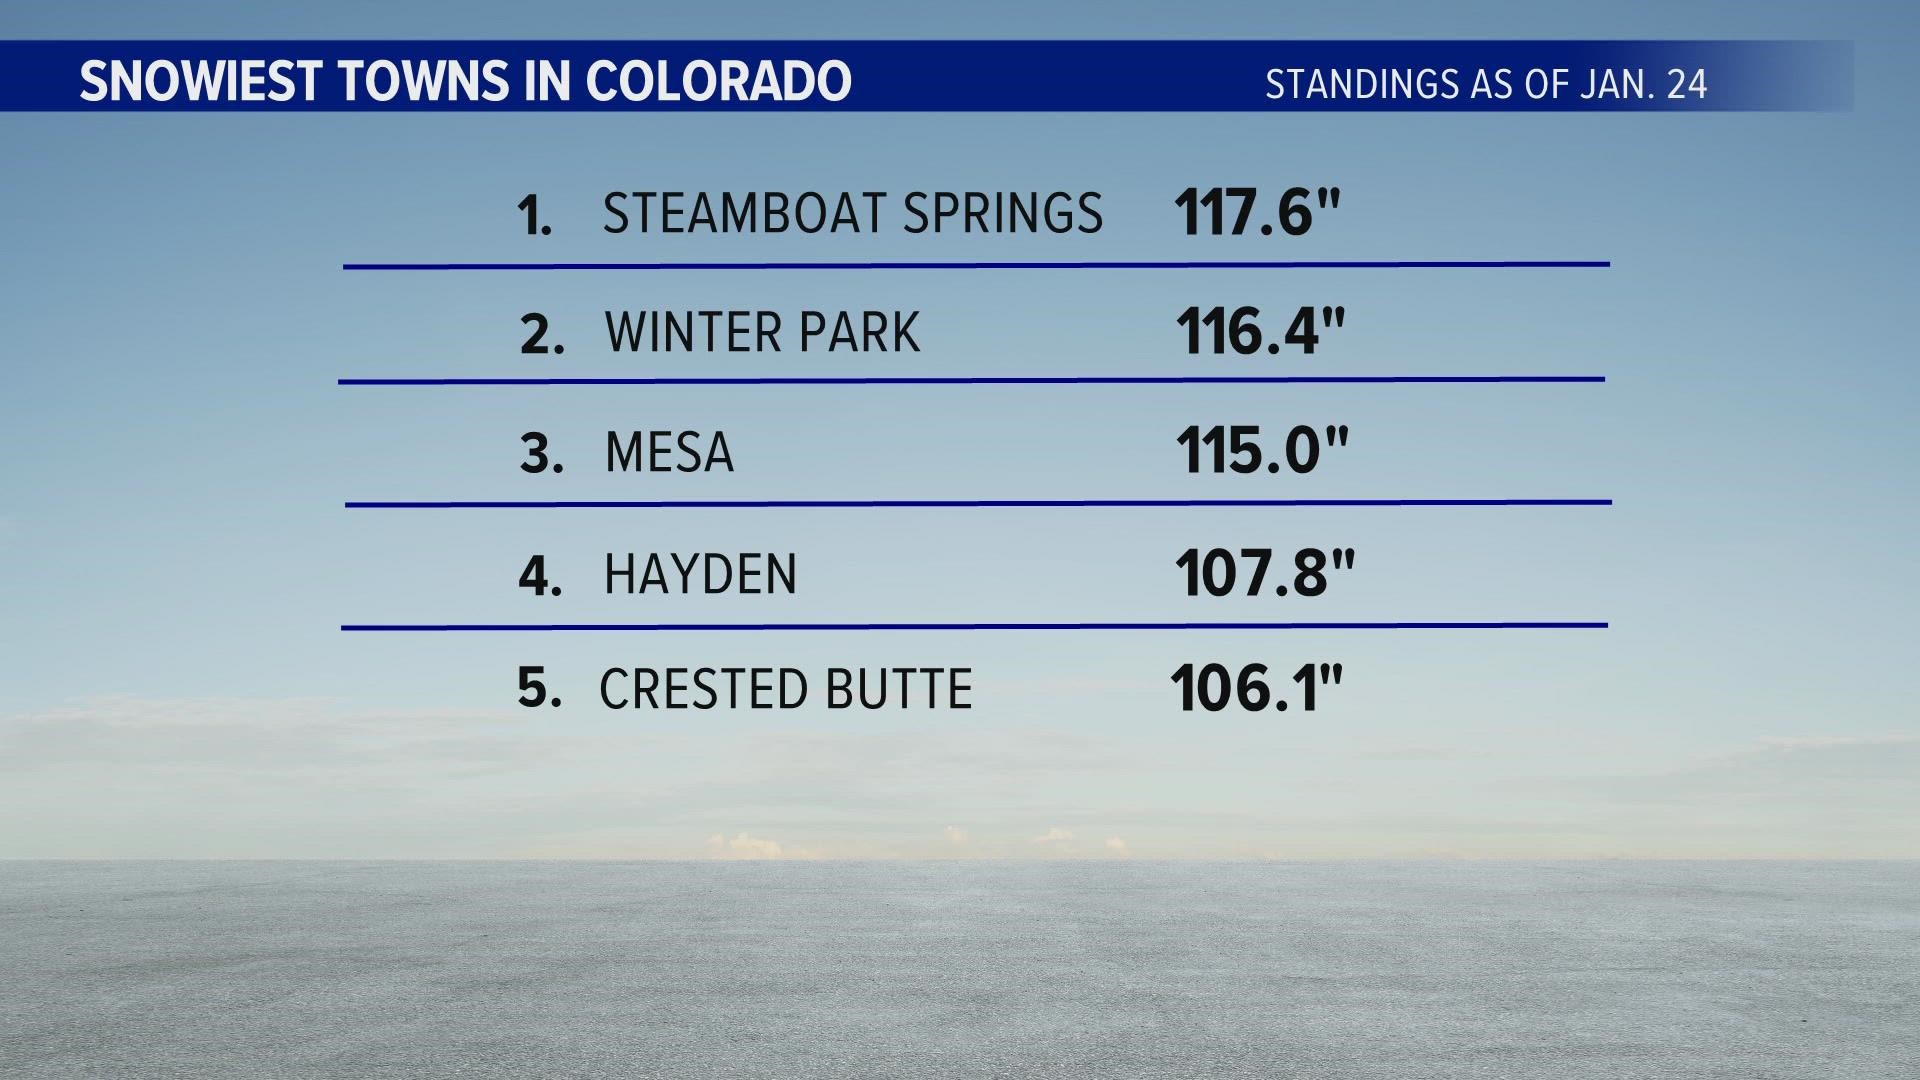 The race for the snowiest town in Colorado is on and of course that usually comes down to the mountain towns.